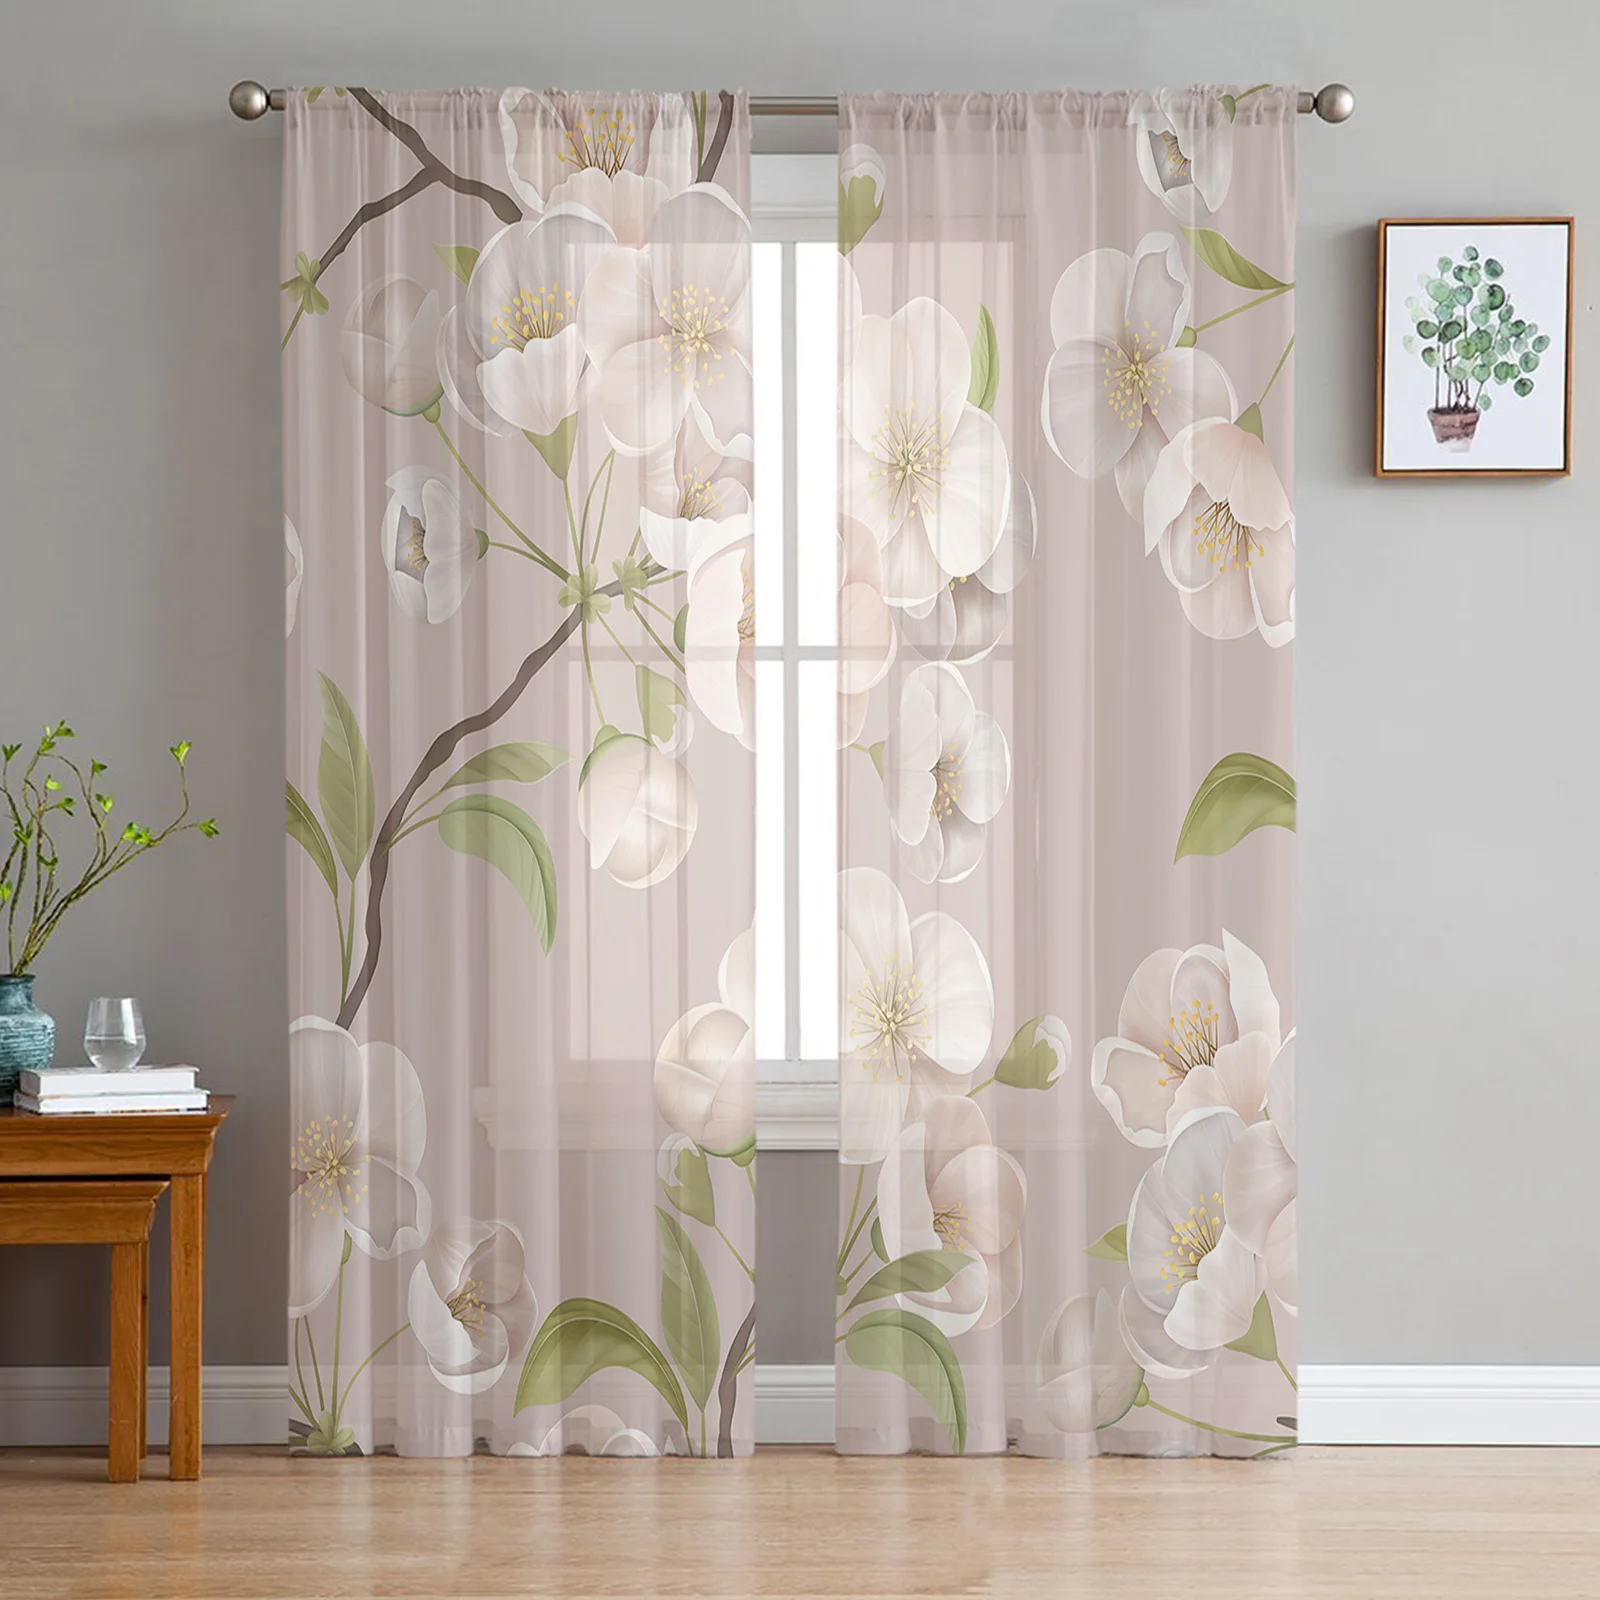 

Spring Brown Background Peach Blossom Sheer Curtains for Living Room Voile Curtain Bedroom Bathroom Tulle Curtains Window Drapes